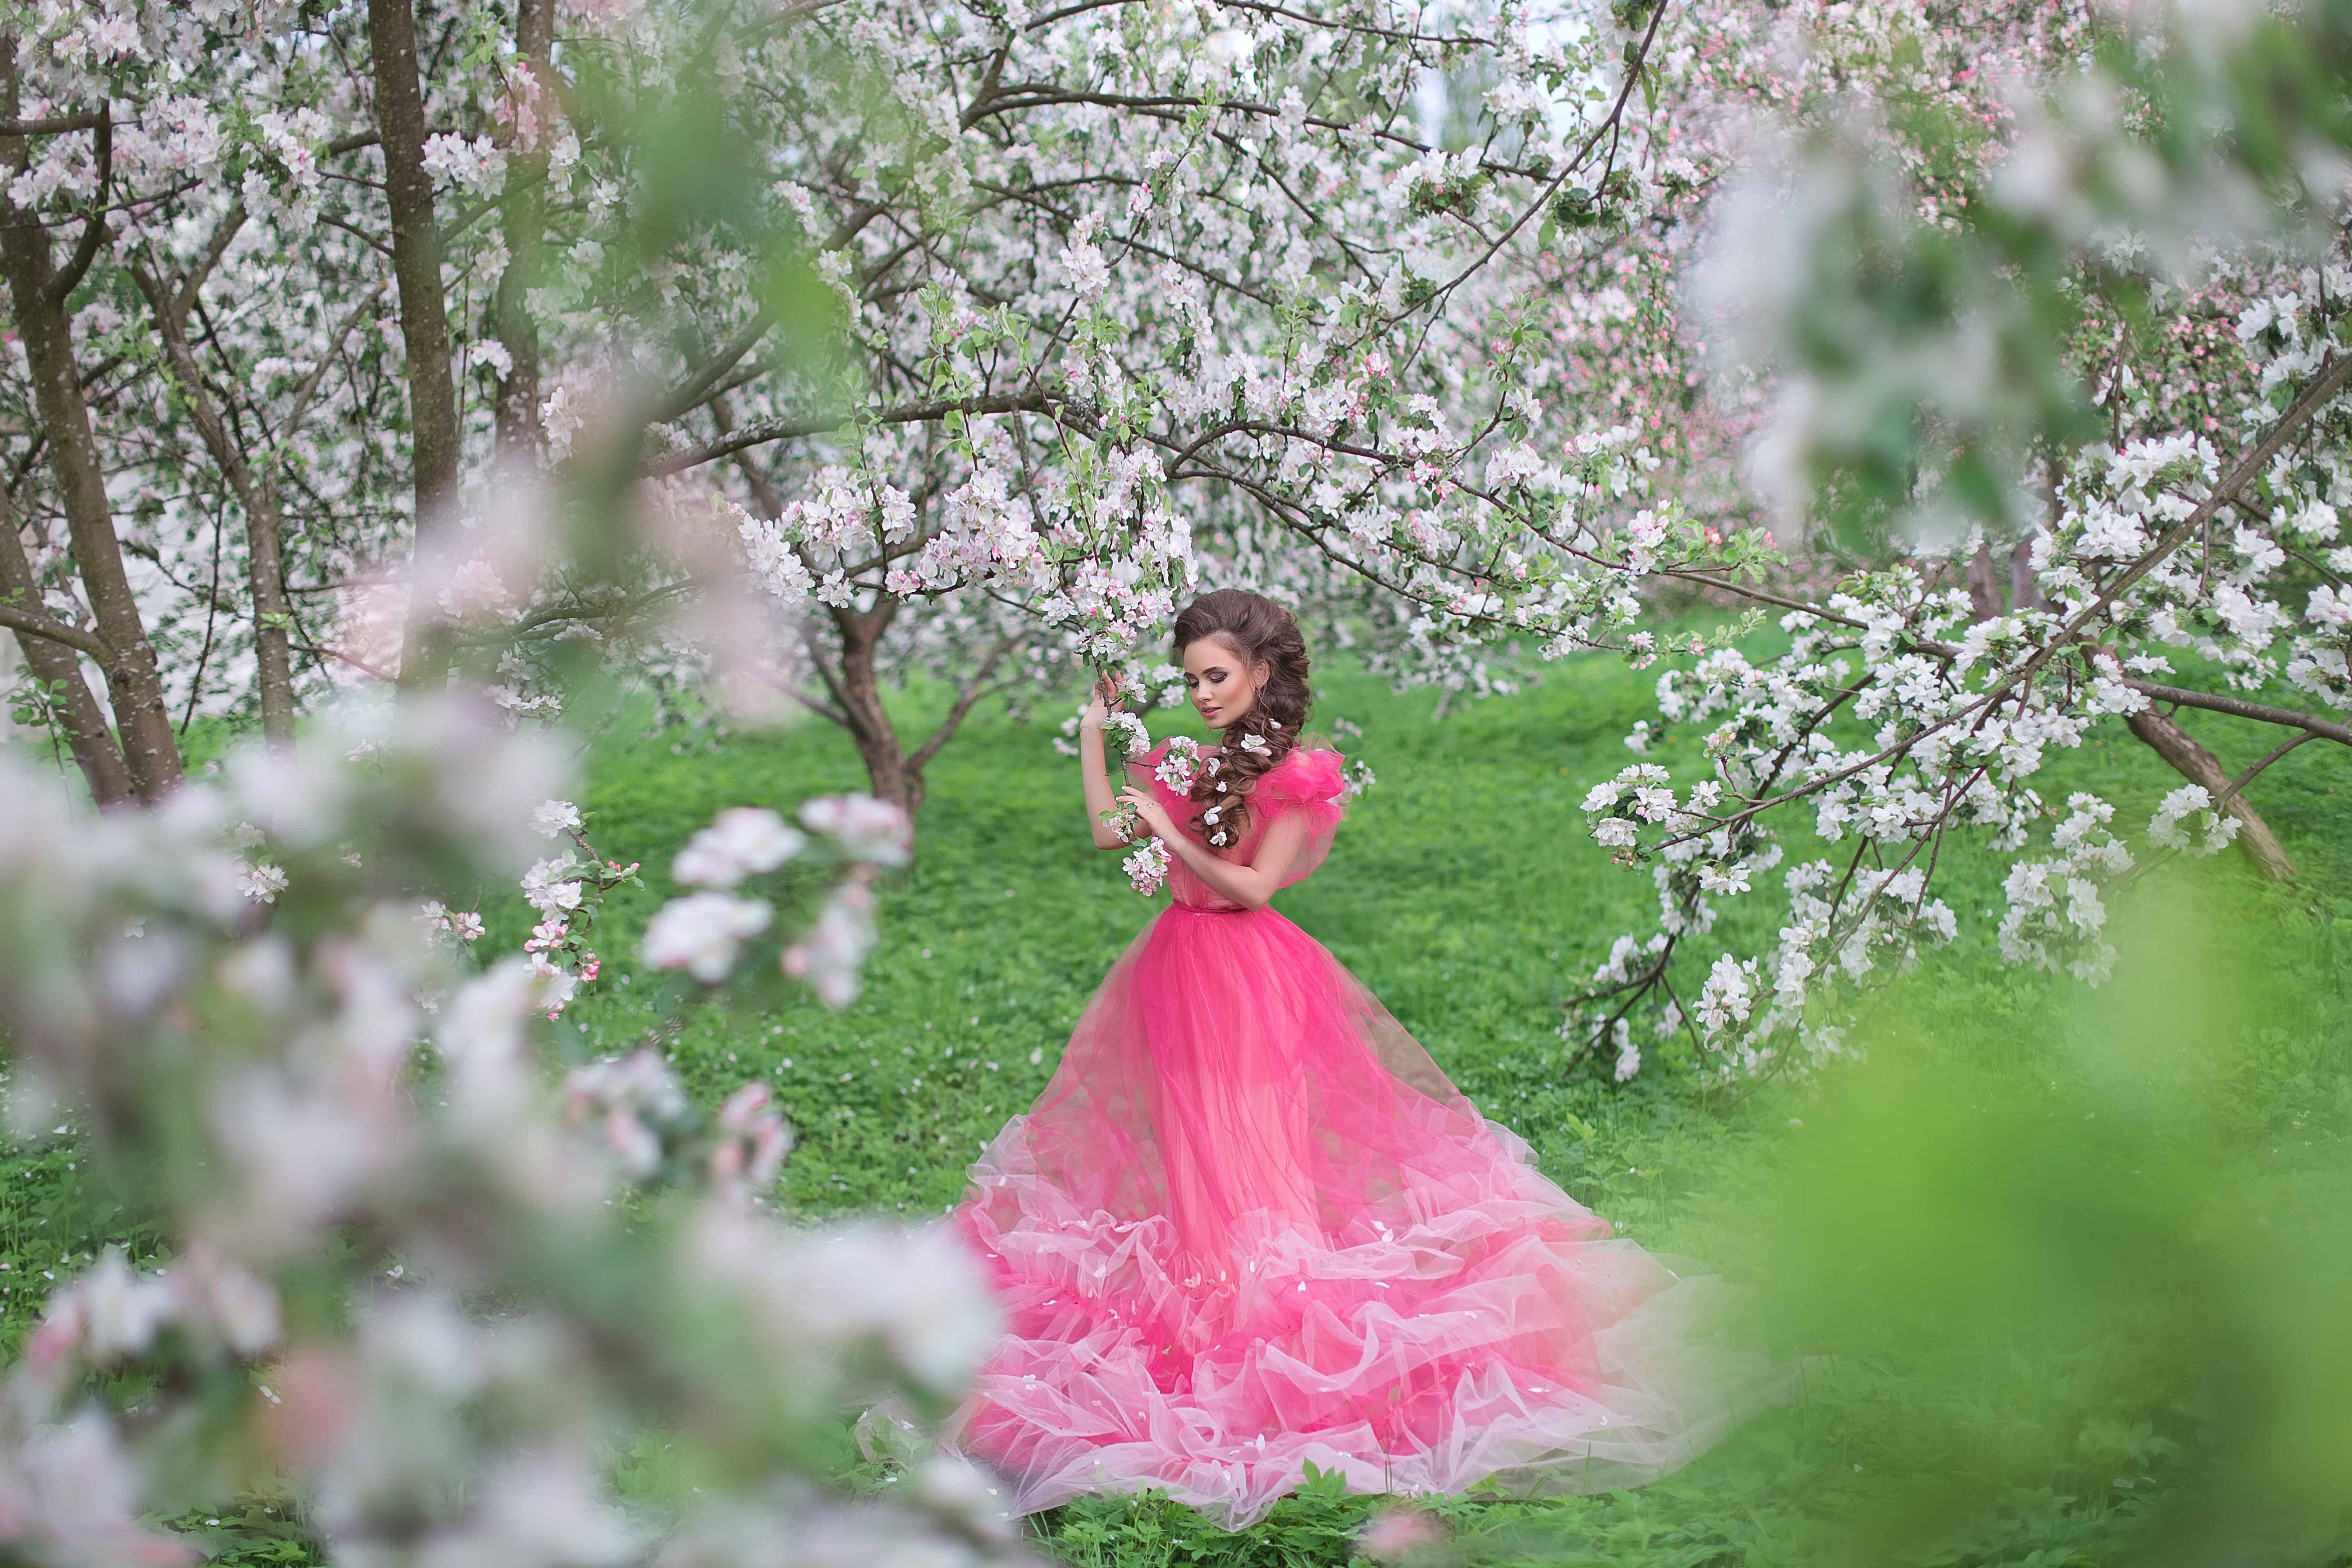 A beautiful young lady with long hair in a light pink ball gown in blooming orchard